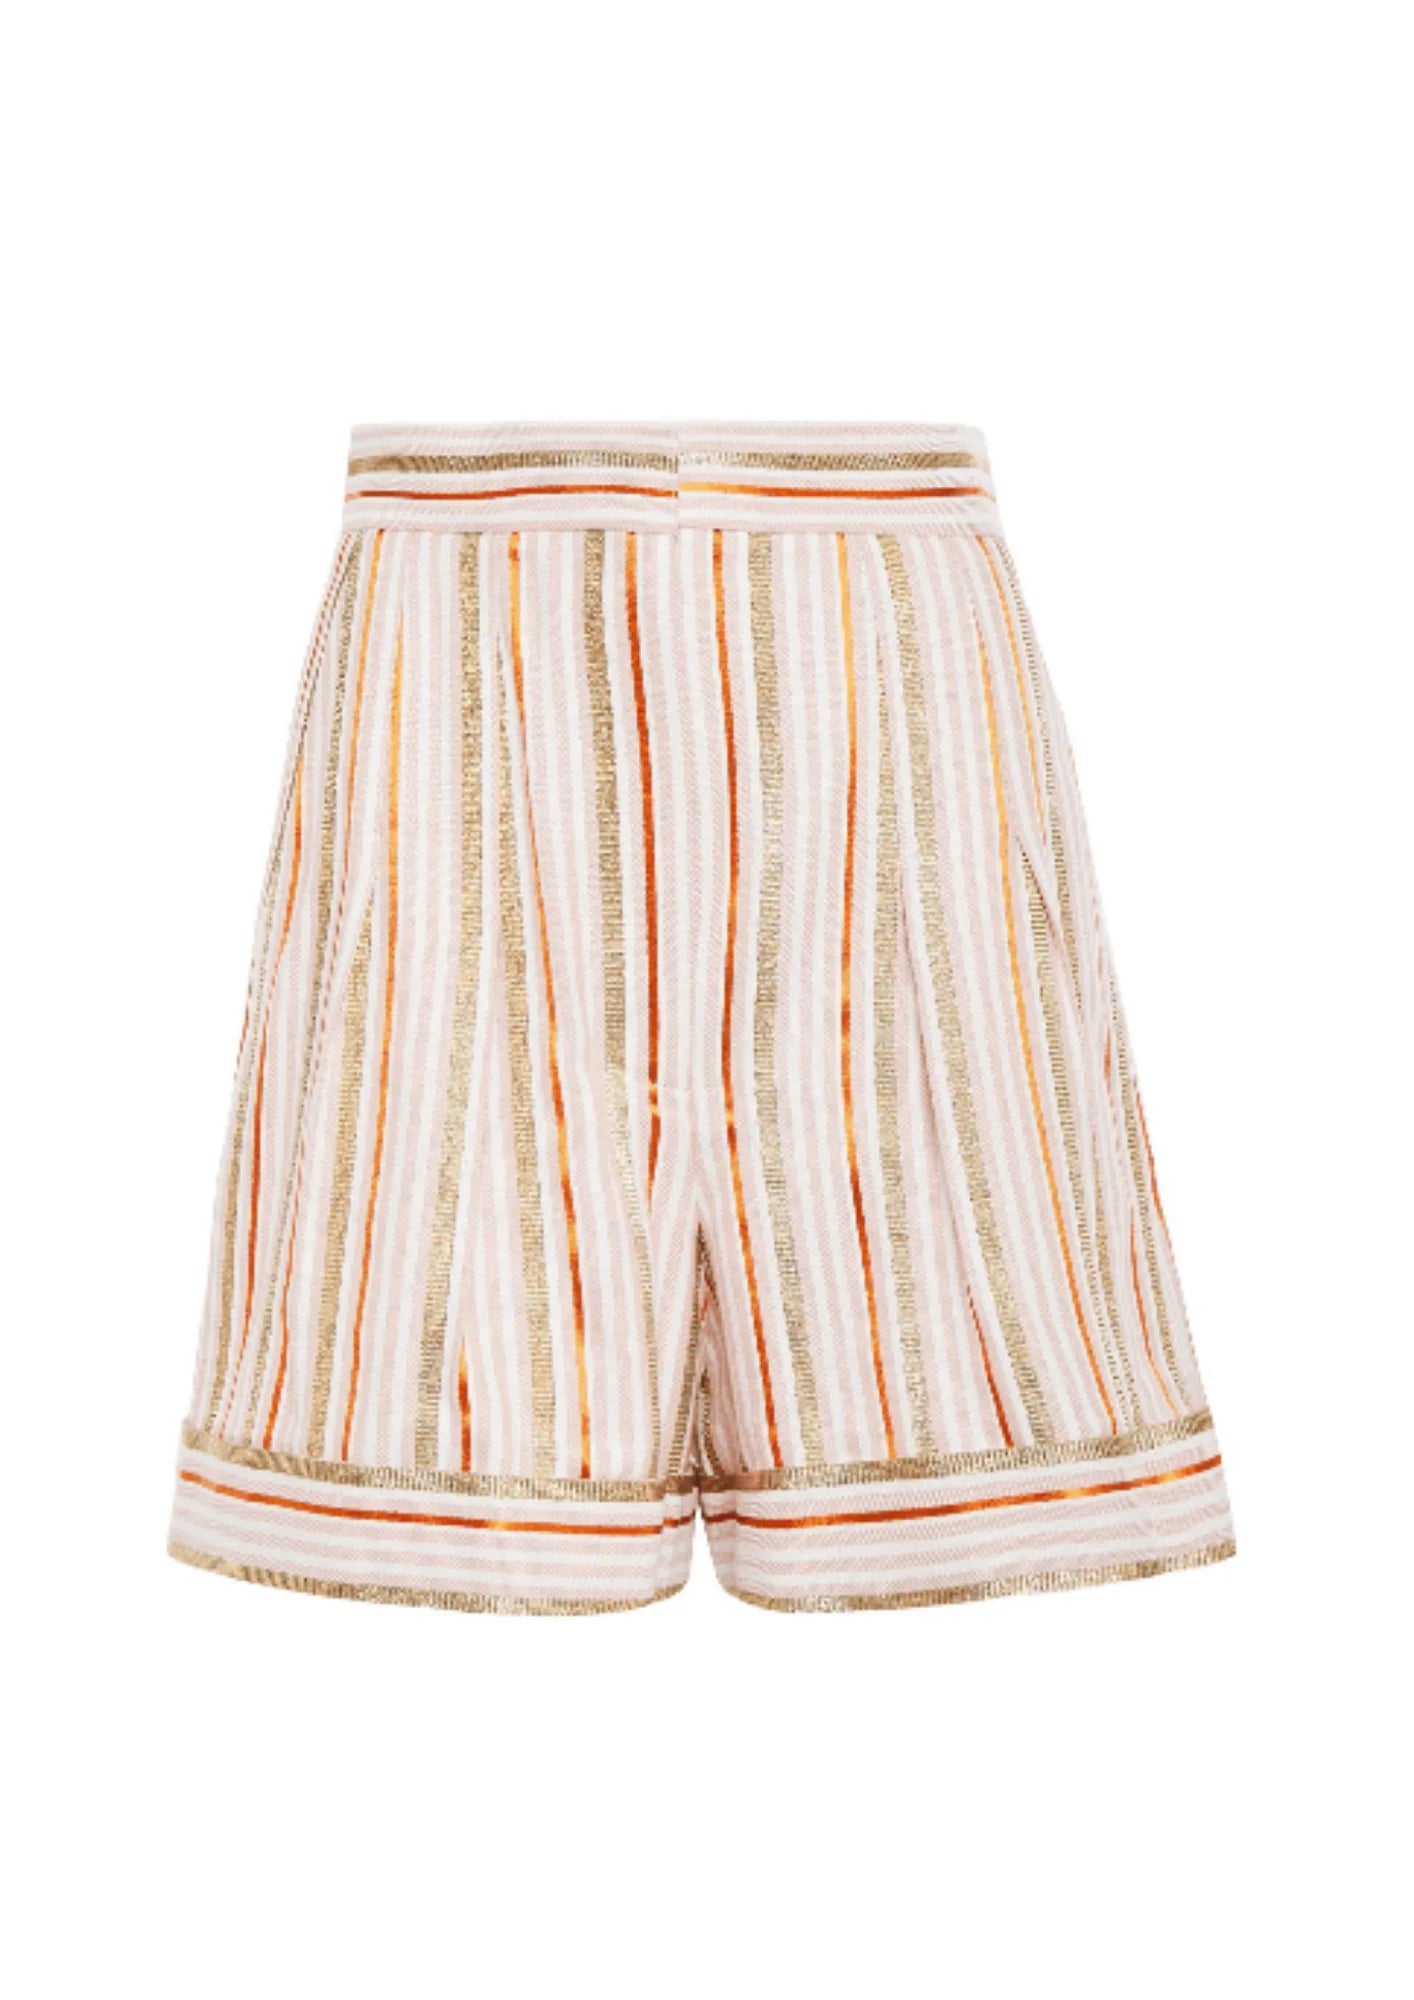 COLORFUL STRIPED SHORTS